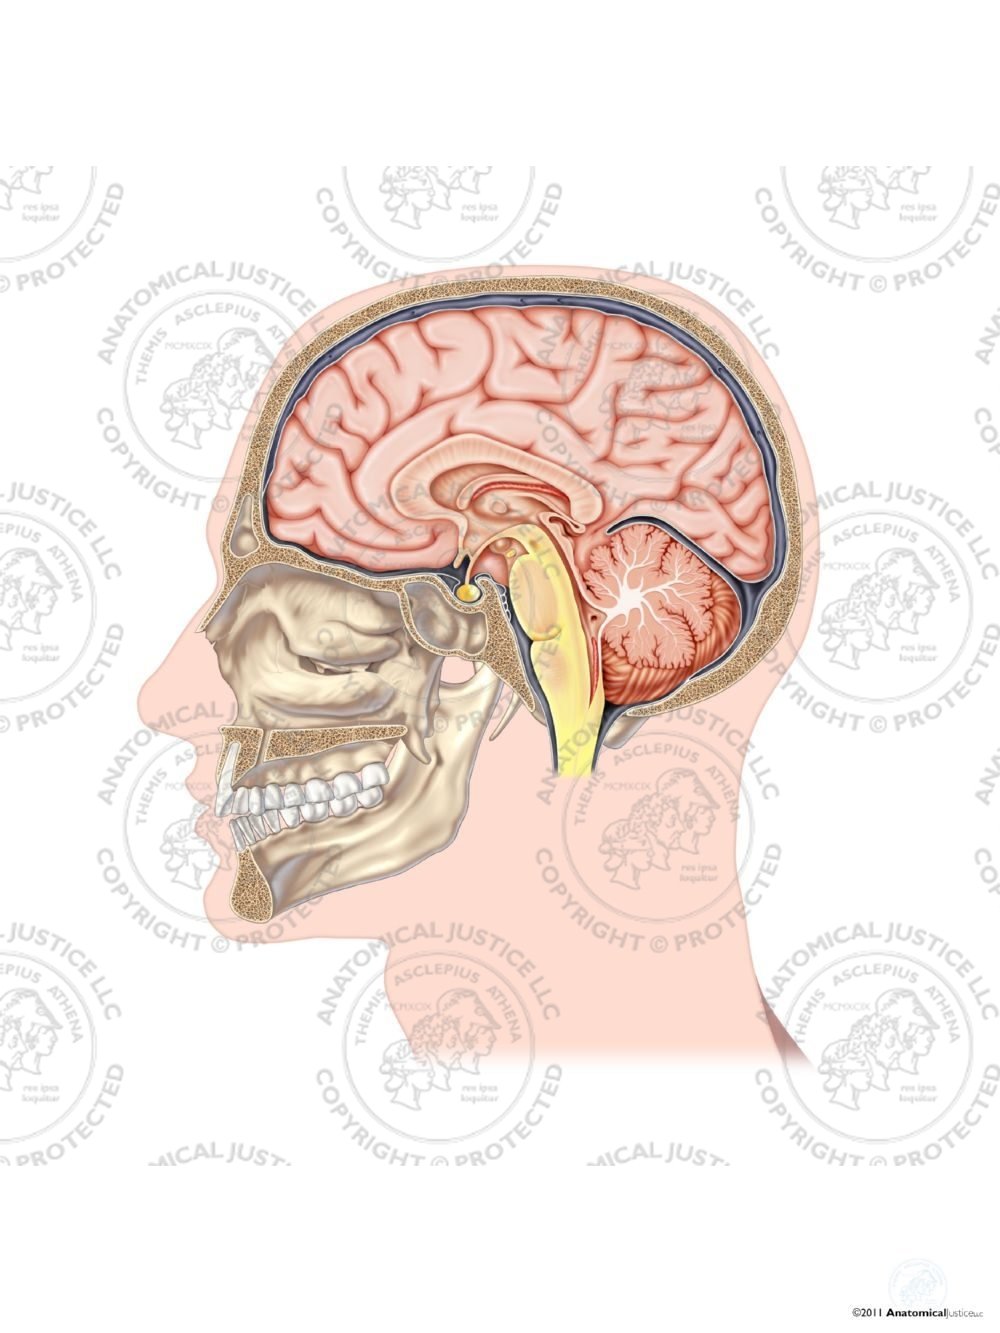 Sagittal Section of the Brain – No Text